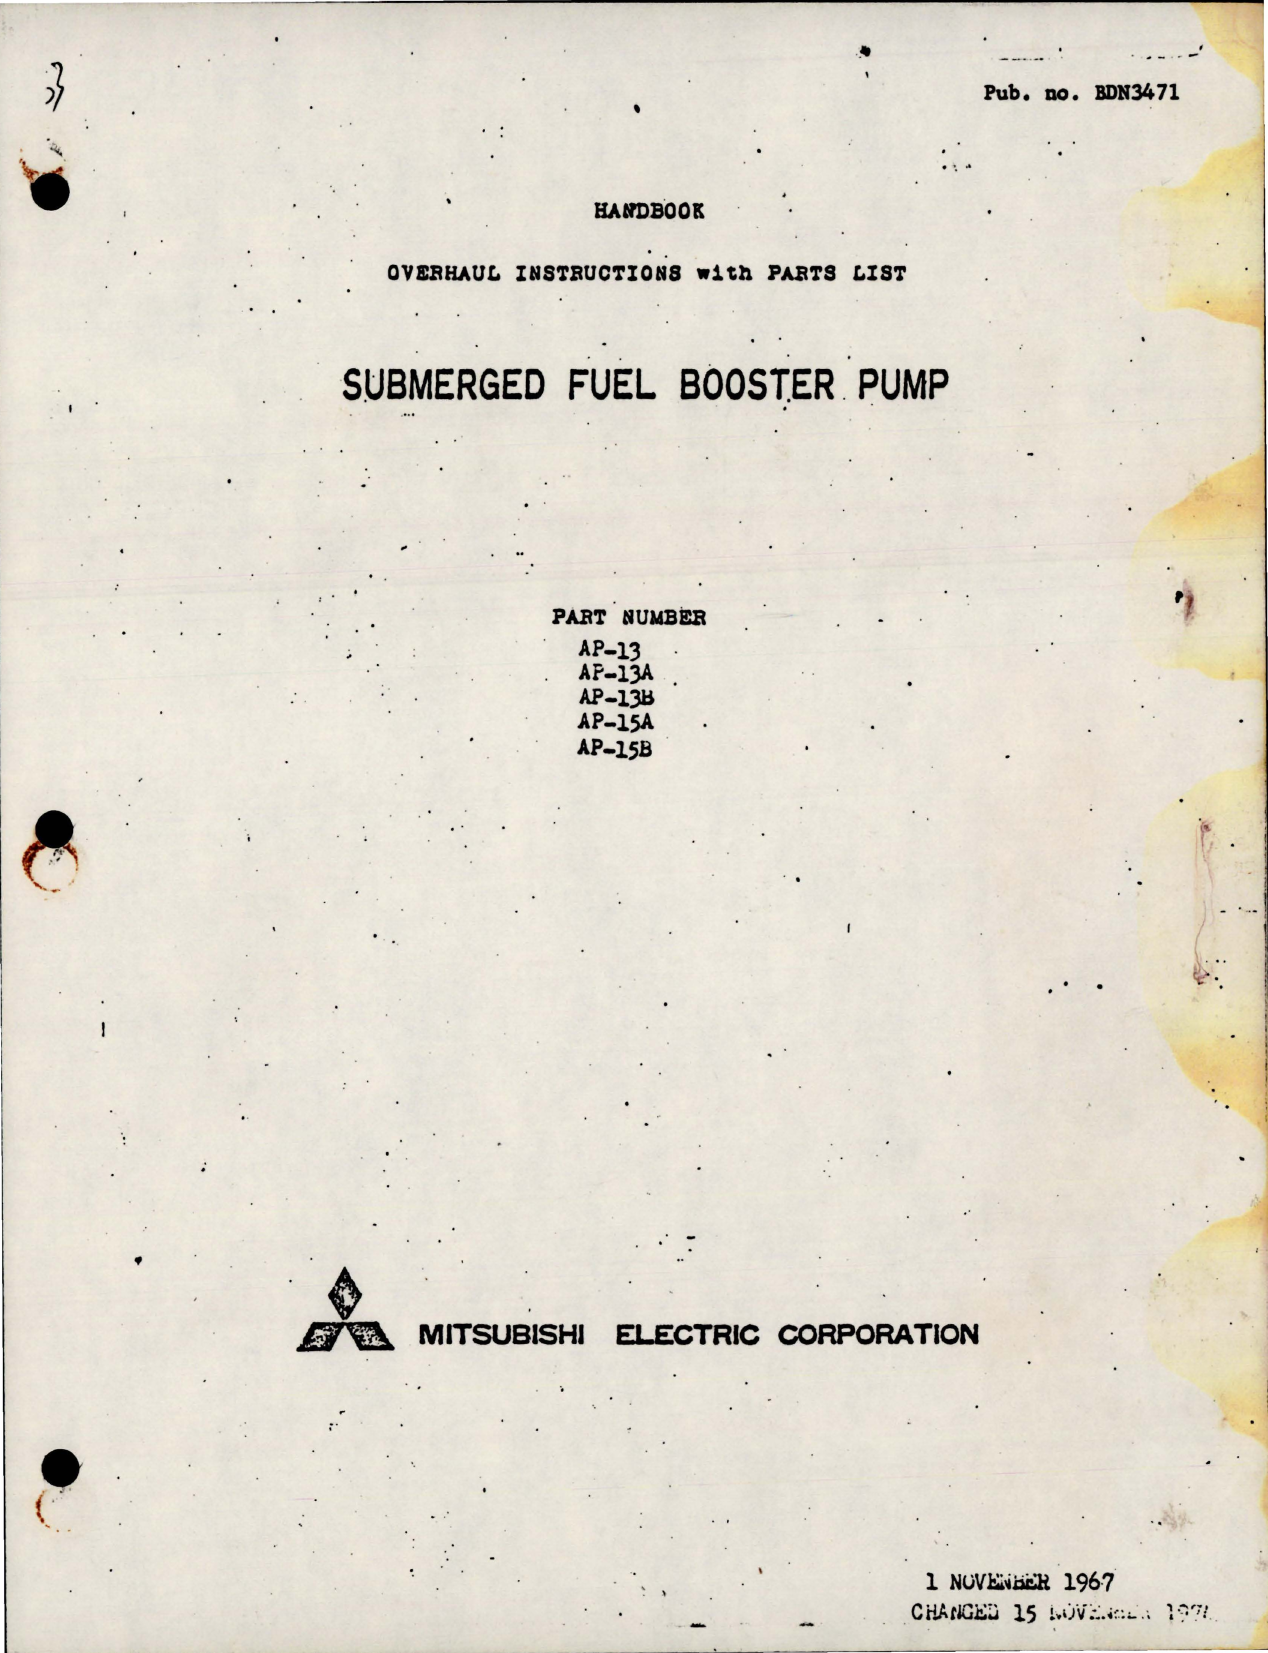 Sample page 1 from AirCorps Library document: Overhaul Instructions w Parts List for Submerged Fuel Booster Pump